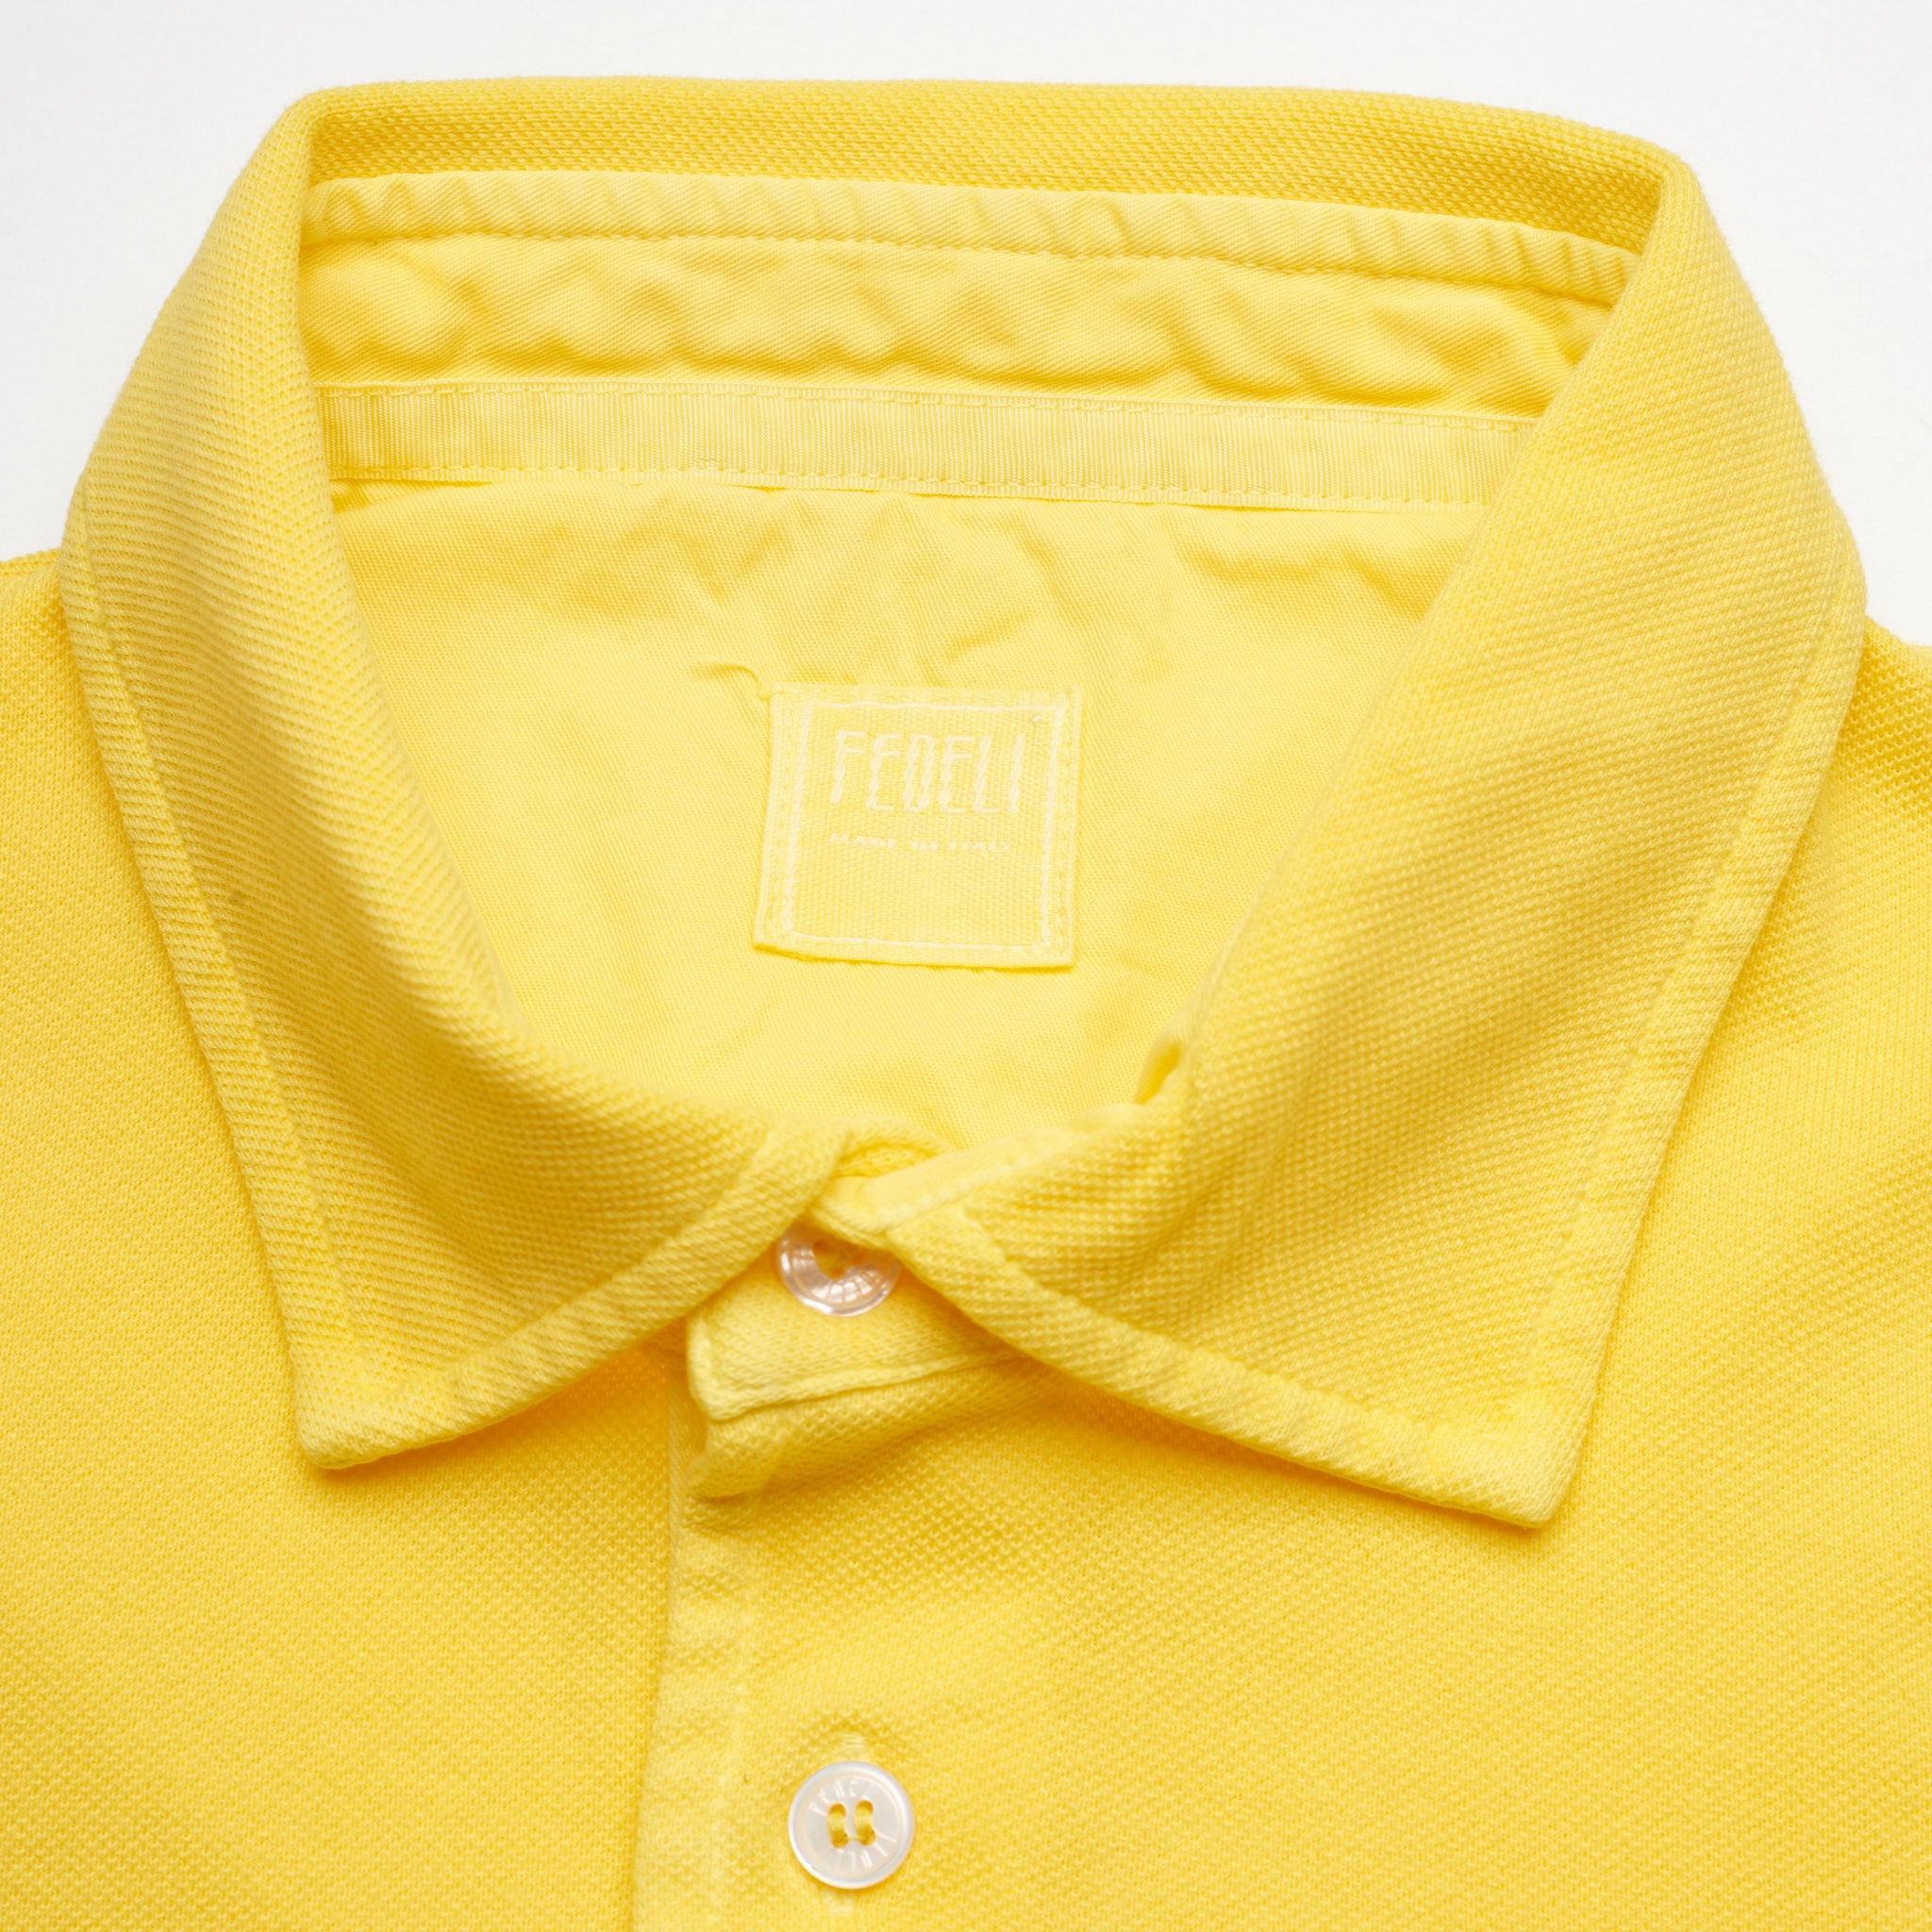 FEDELI "North" Yellow Cotton Frosted Pique Short Sleeve Polo Shirt EU 52 NEW US L FEDELI